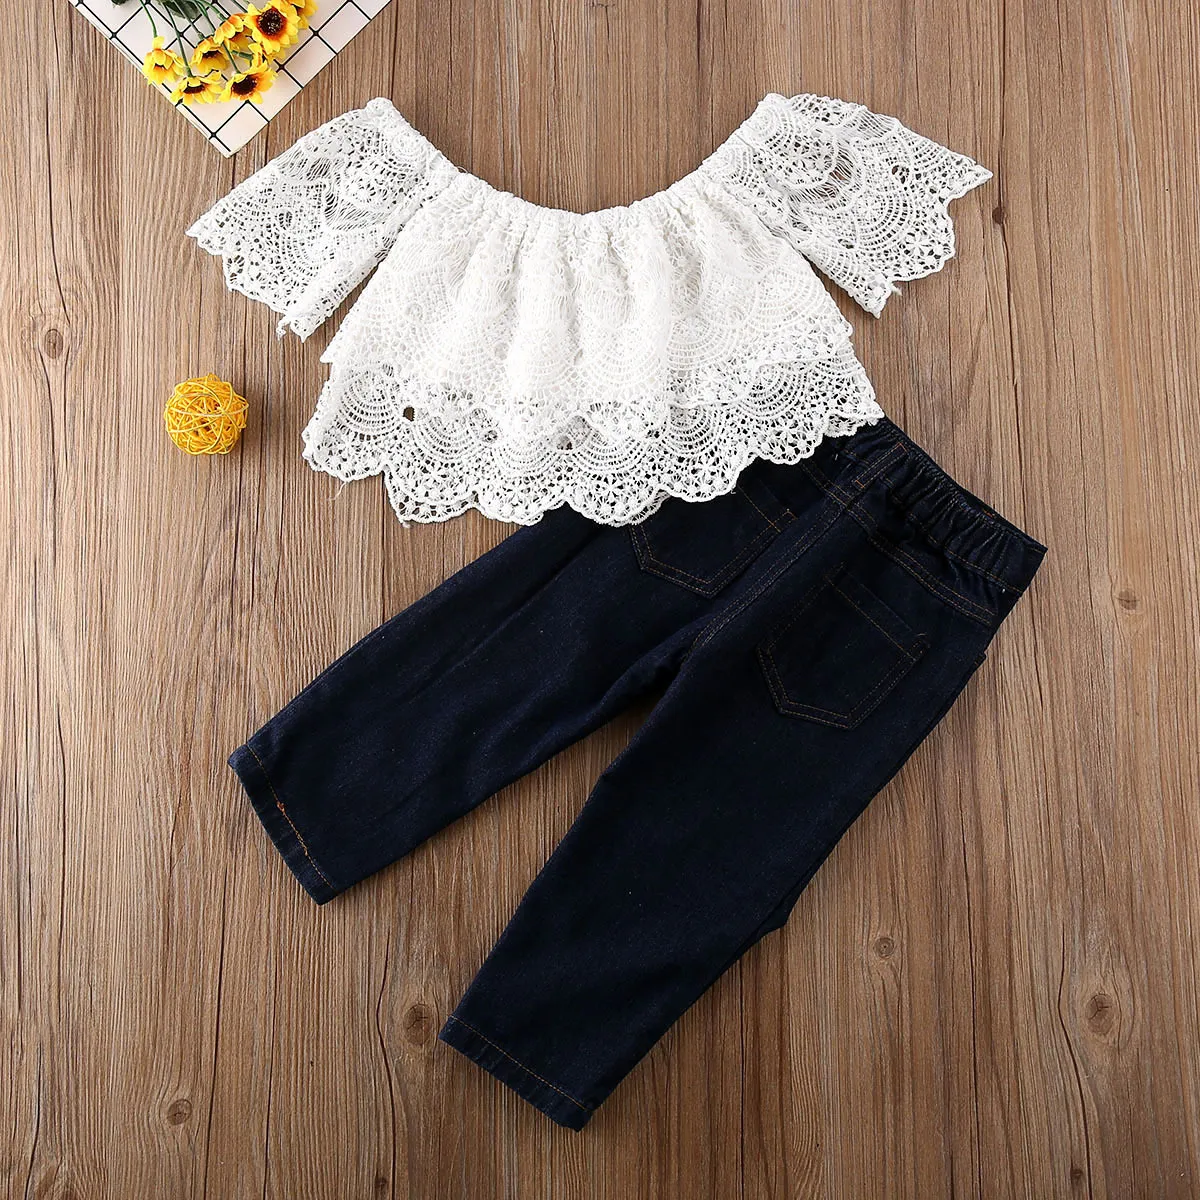 Toddler Kids Baby Girl Clothes Baby Summer Clothing Off Shoulder Lace Tops Ripped Fishnet Patchwork Jeans Pants Outfit Y200831349361